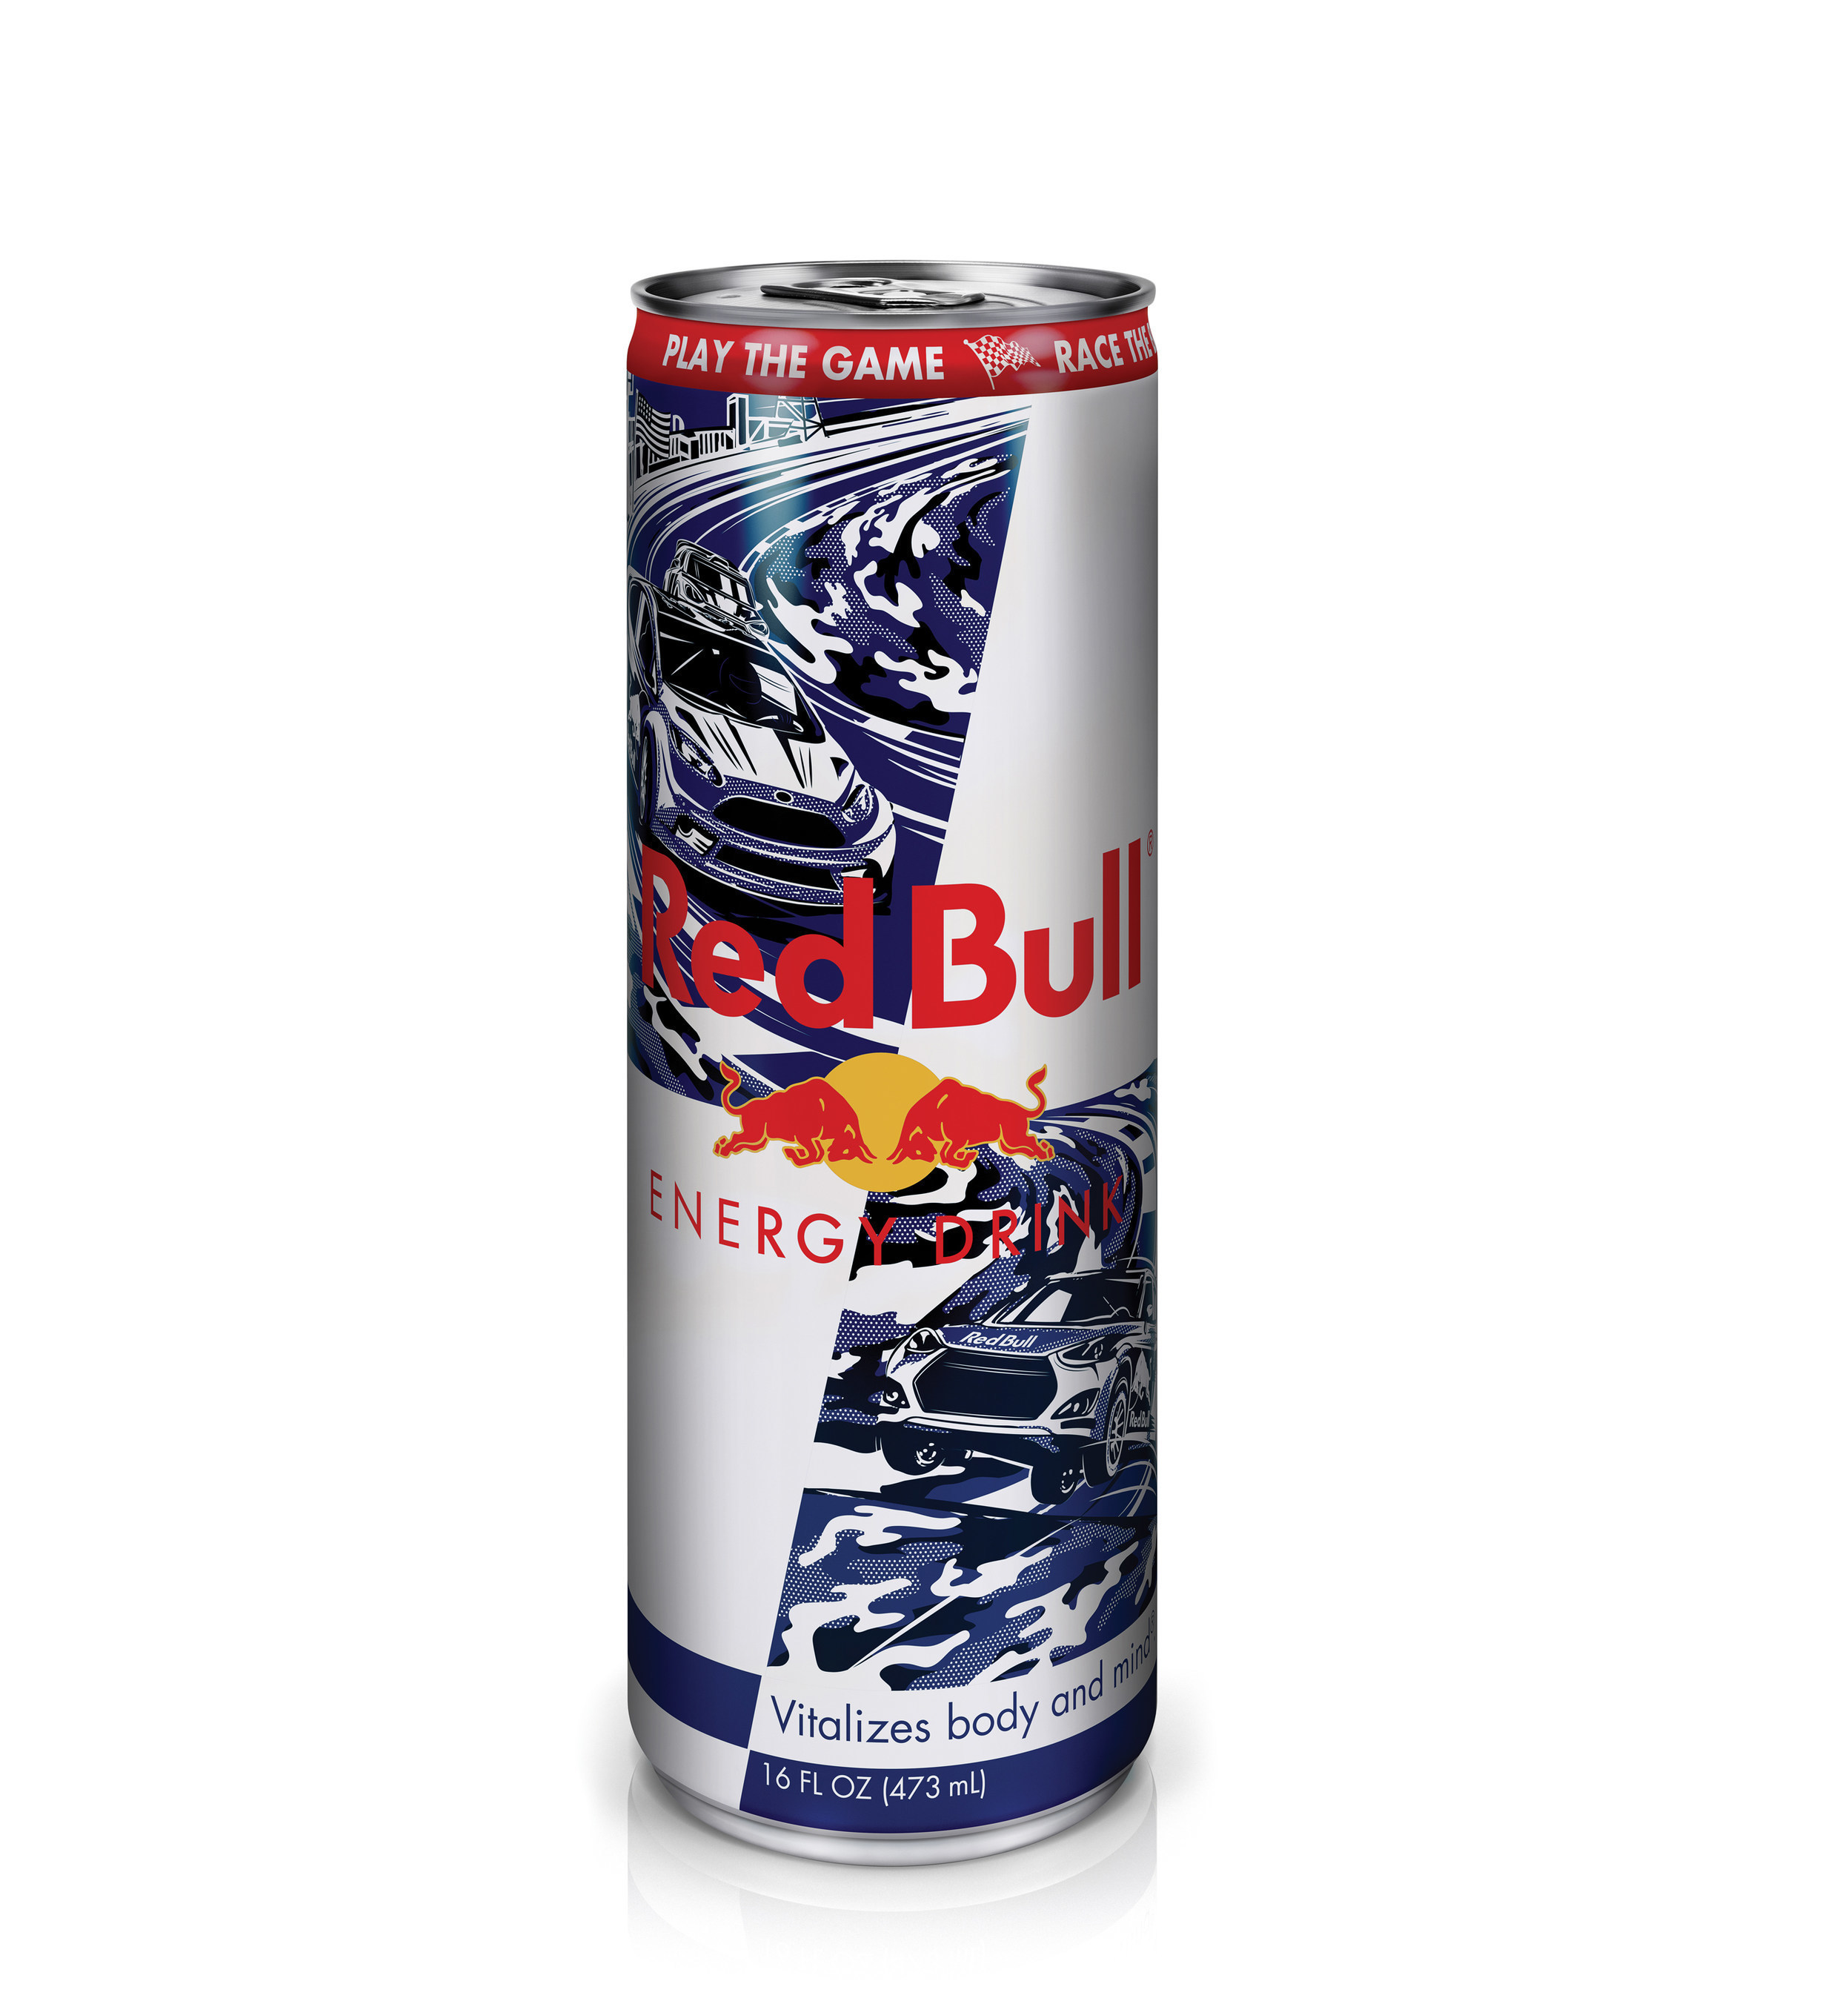 Red Bull's 2015 limited edition camouflaged-themed can is available in military channels through the end of July. For the 4th year, a portion of the proceeds from cans sold on bases will benefit the Military Warriors Support Foundation. The can incorporates the Red Bull Global Rallycross series, which will host an event stop at the Marine Corps Air Station New River (MCAS New River) in Jacksonville, NC, airing nationally on NBC on Sunday, July 5th at 5:00 pm EDT. Fans can play the "Red Bull Global Rallycross Challenge" online game for free at http://rbgrc.redbull.com.